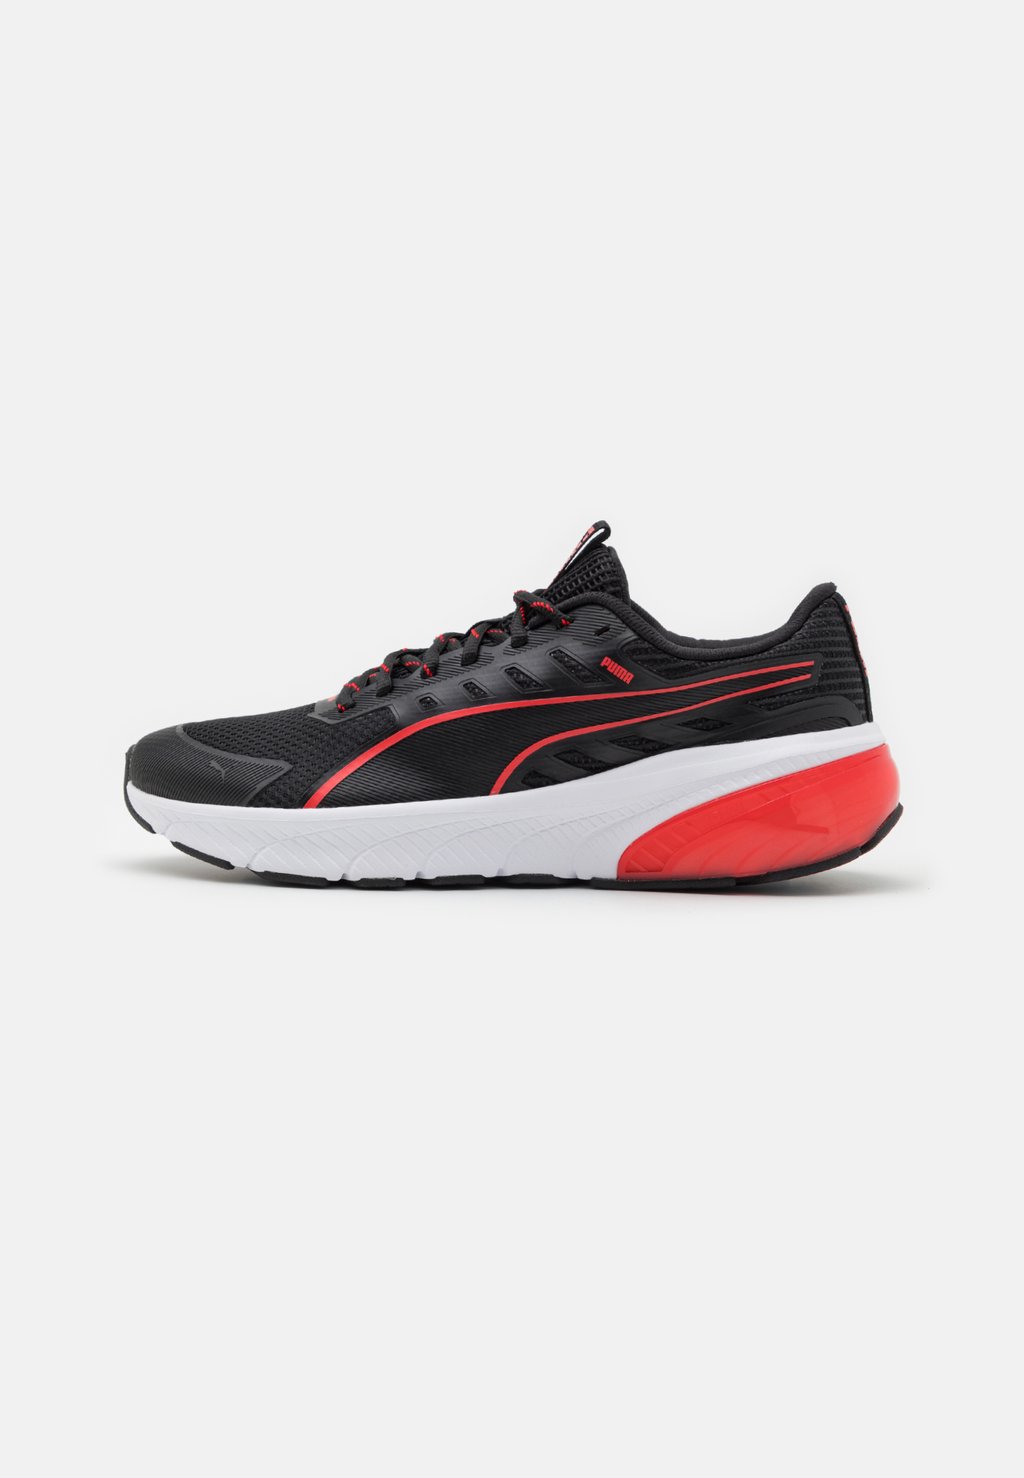 Кроссовки Cell Glare Unisex Puma, цвет black/for all time red